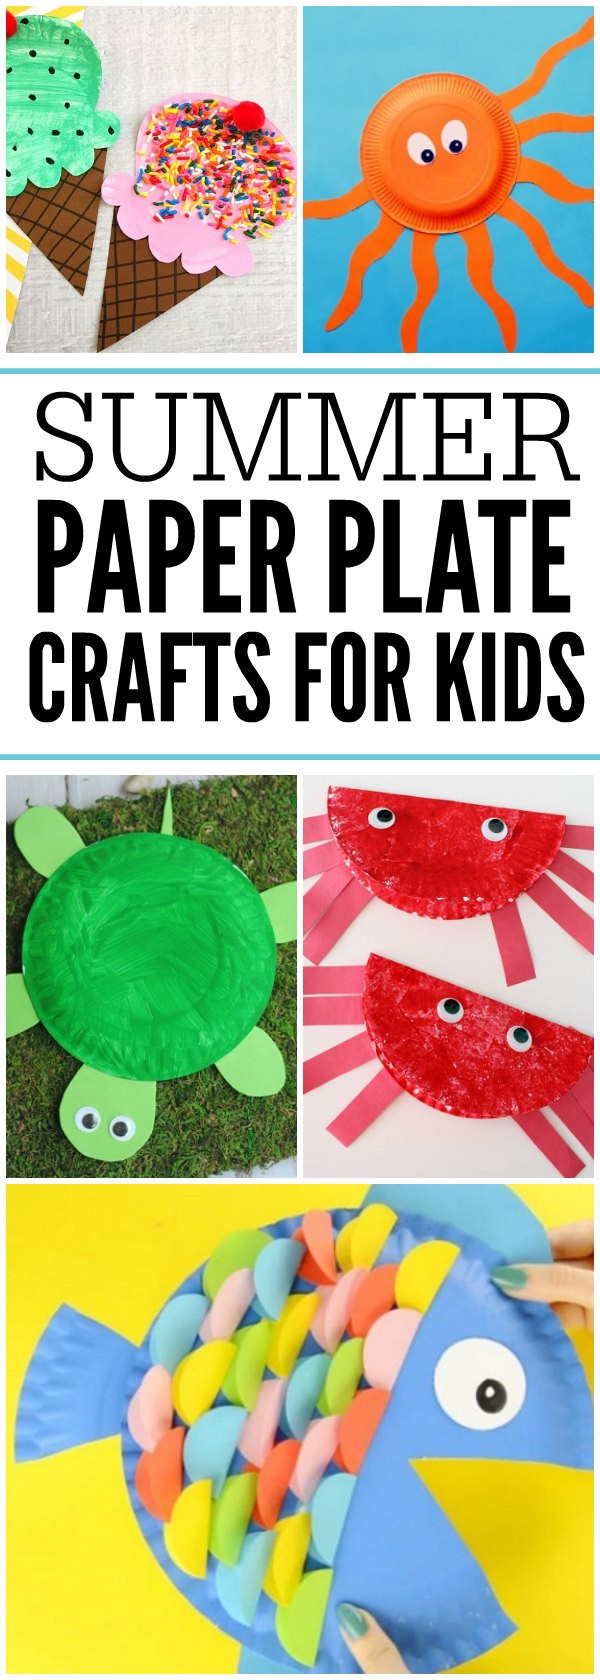 Summer Paper Crafts
 Easy Summer Paper Plate Crafts for Kids Plates make great